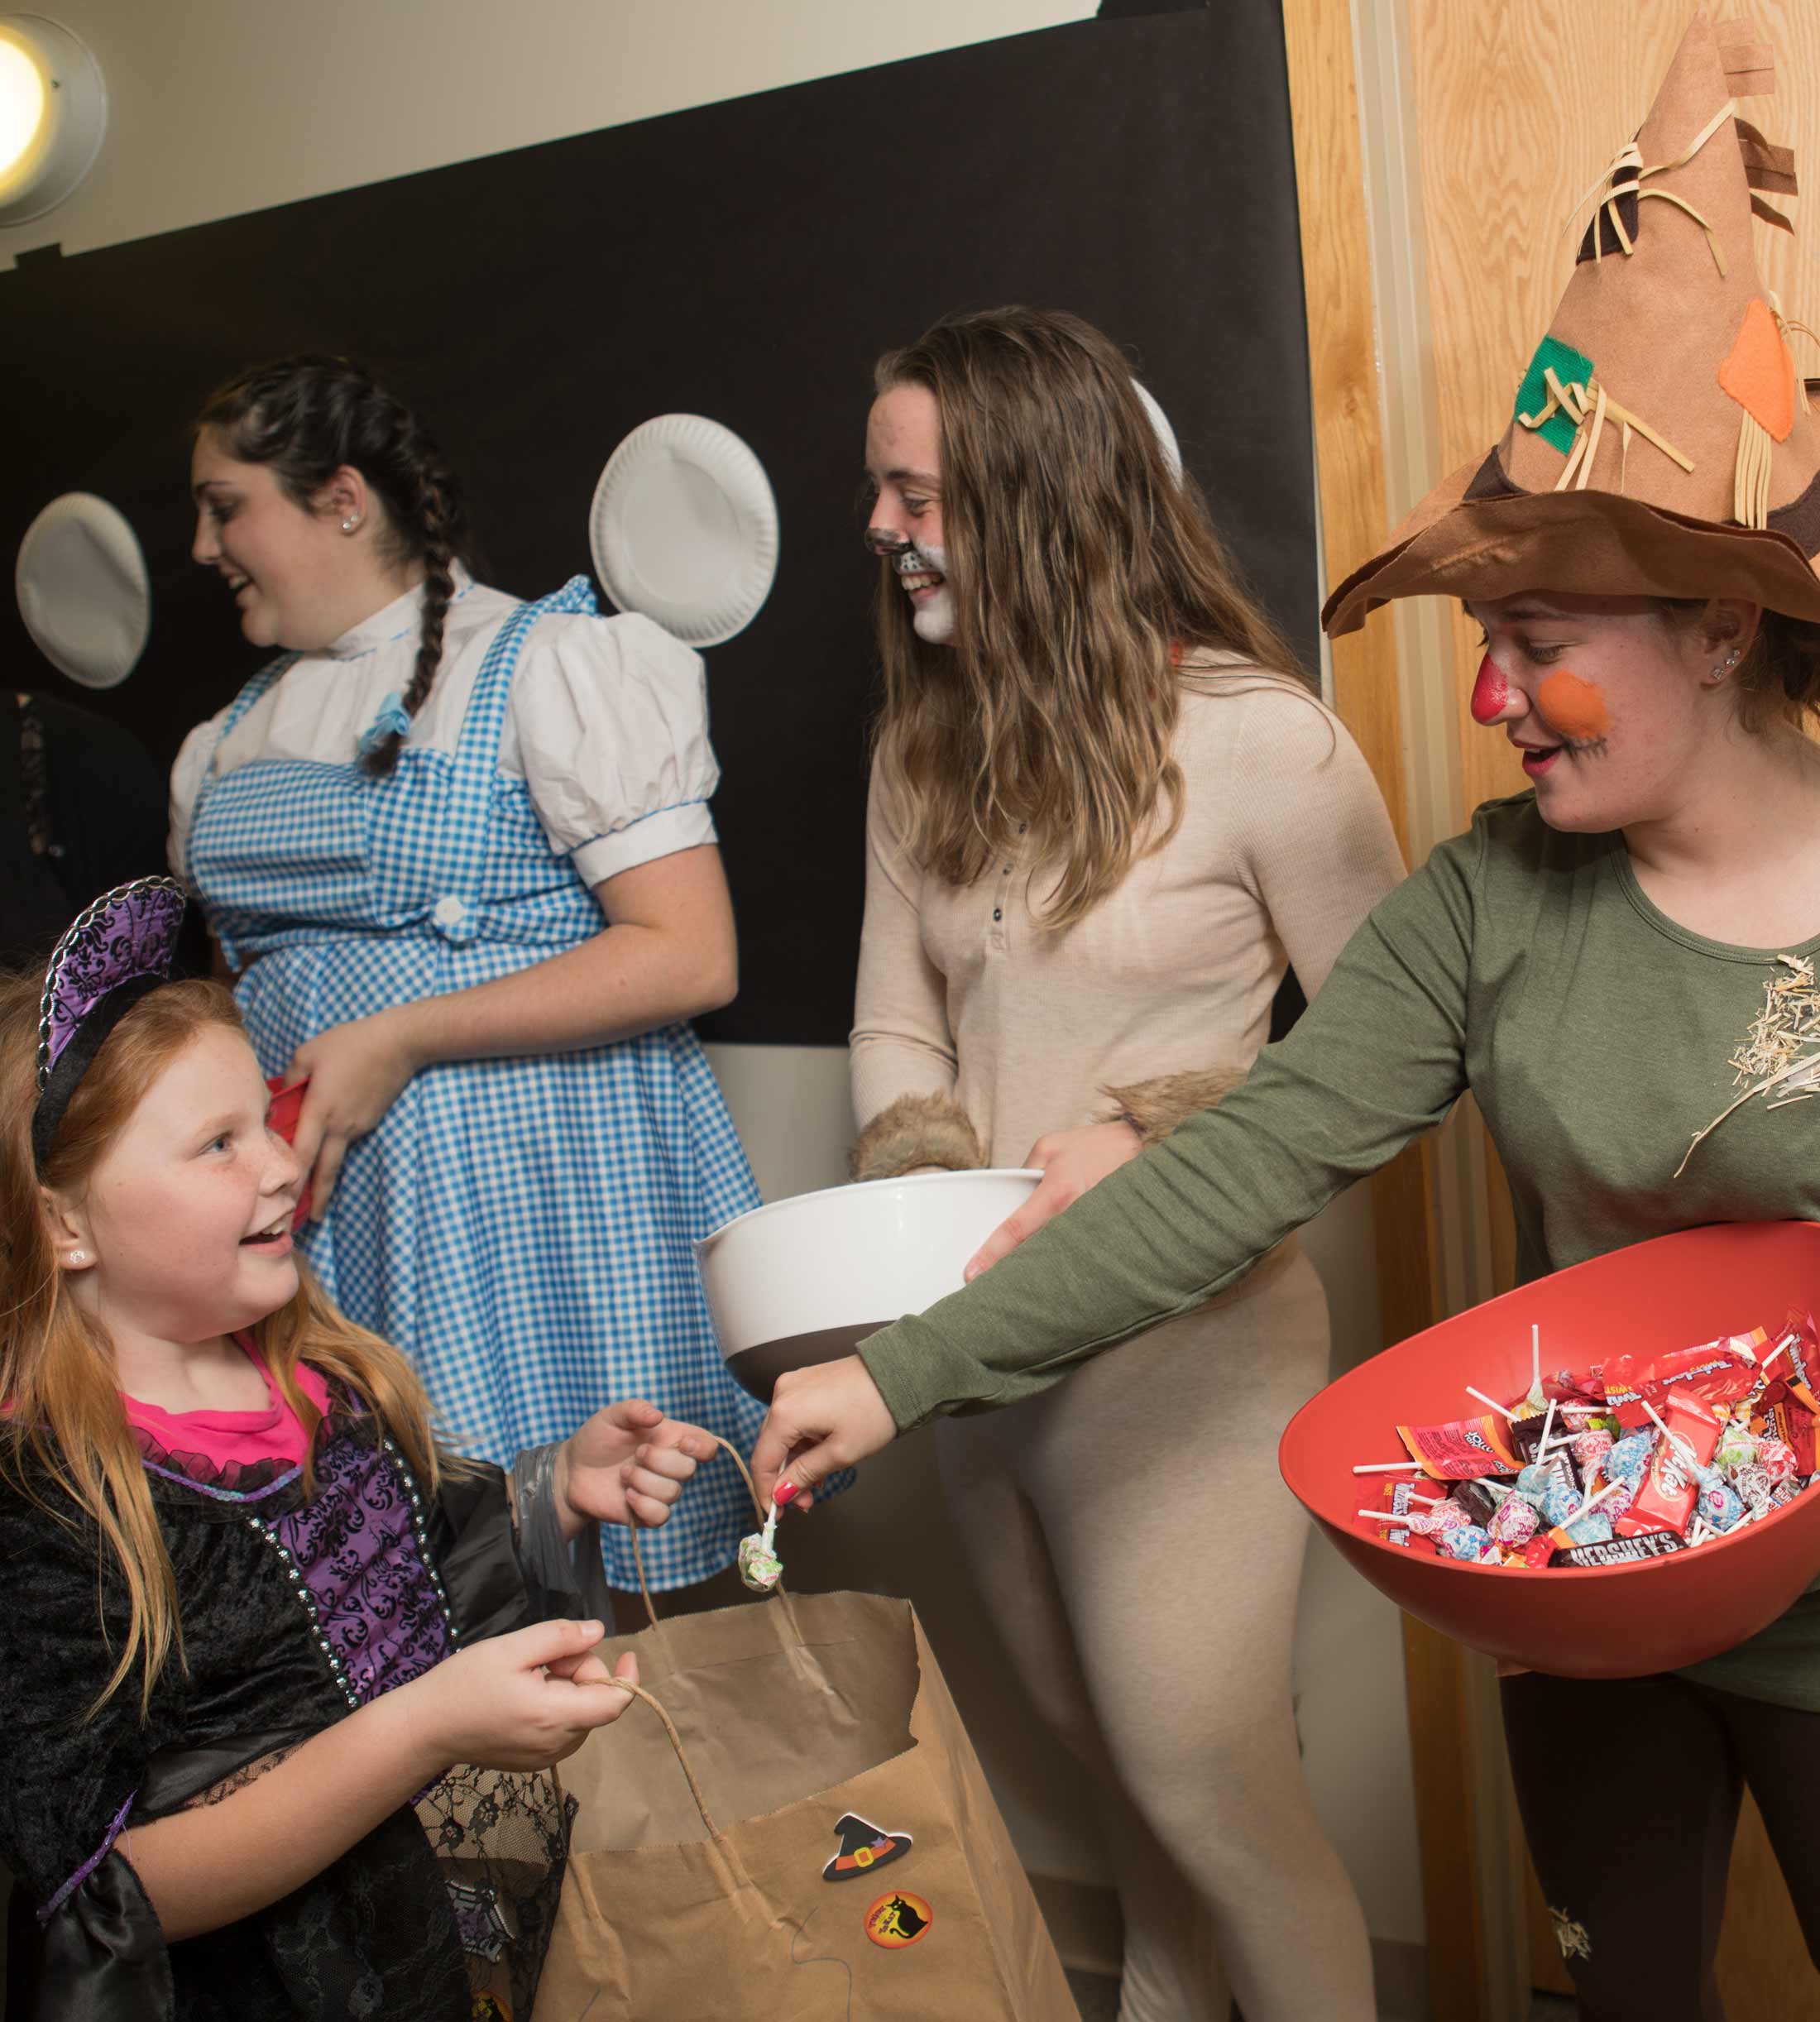 Students pass out candy to kids in Affinity West during Trick-or-Treat night 